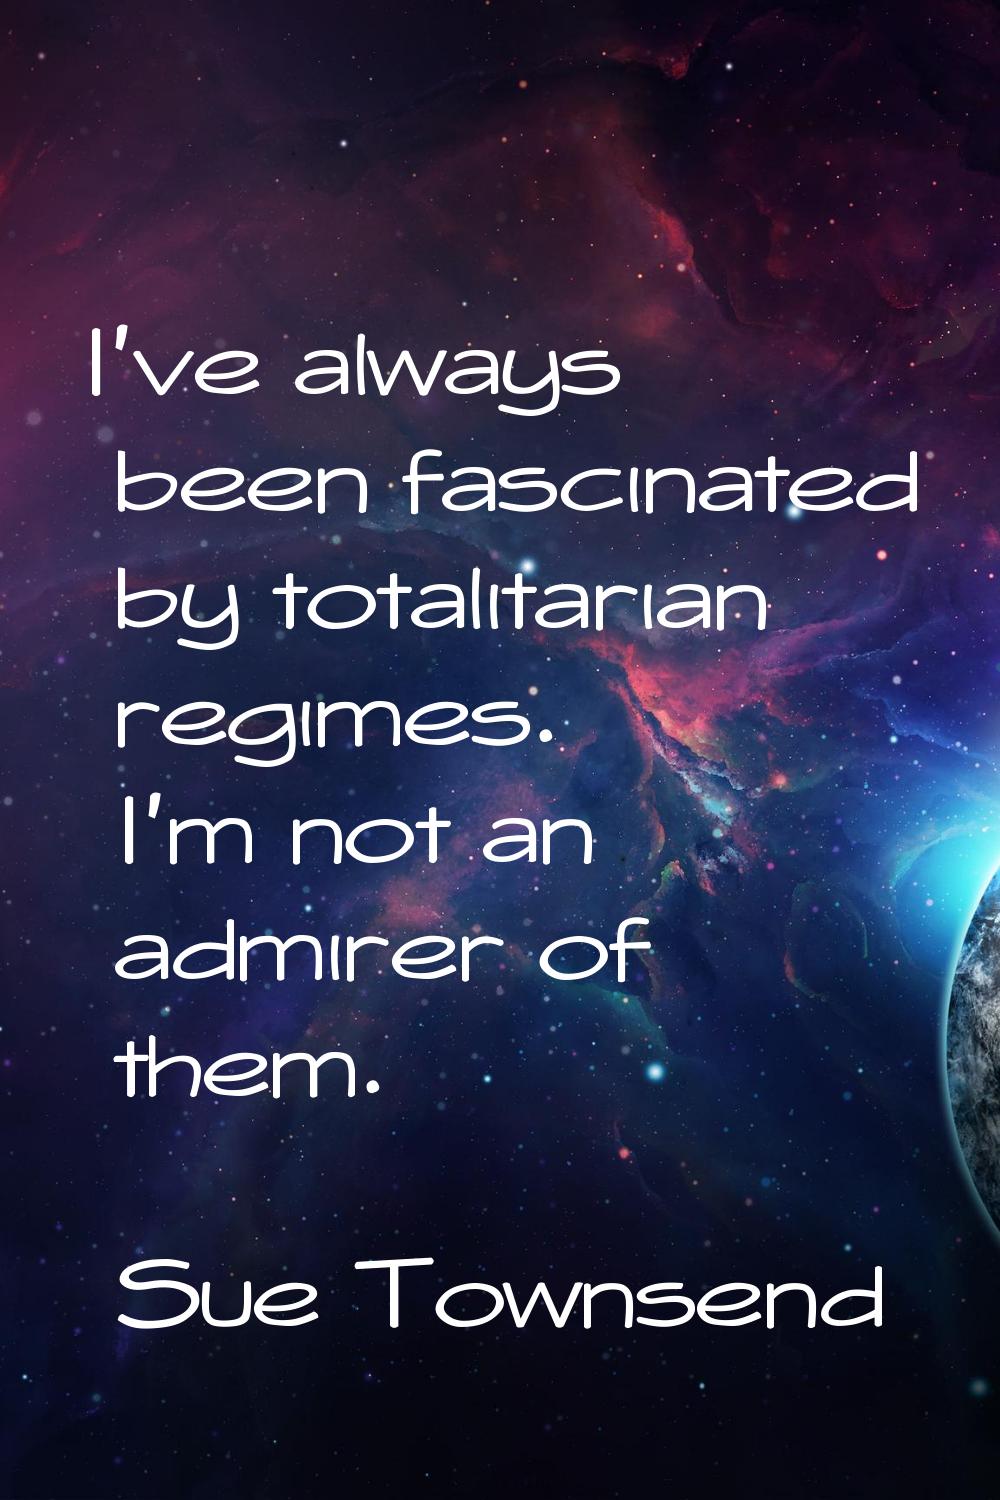 I've always been fascinated by totalitarian regimes. I'm not an admirer of them.